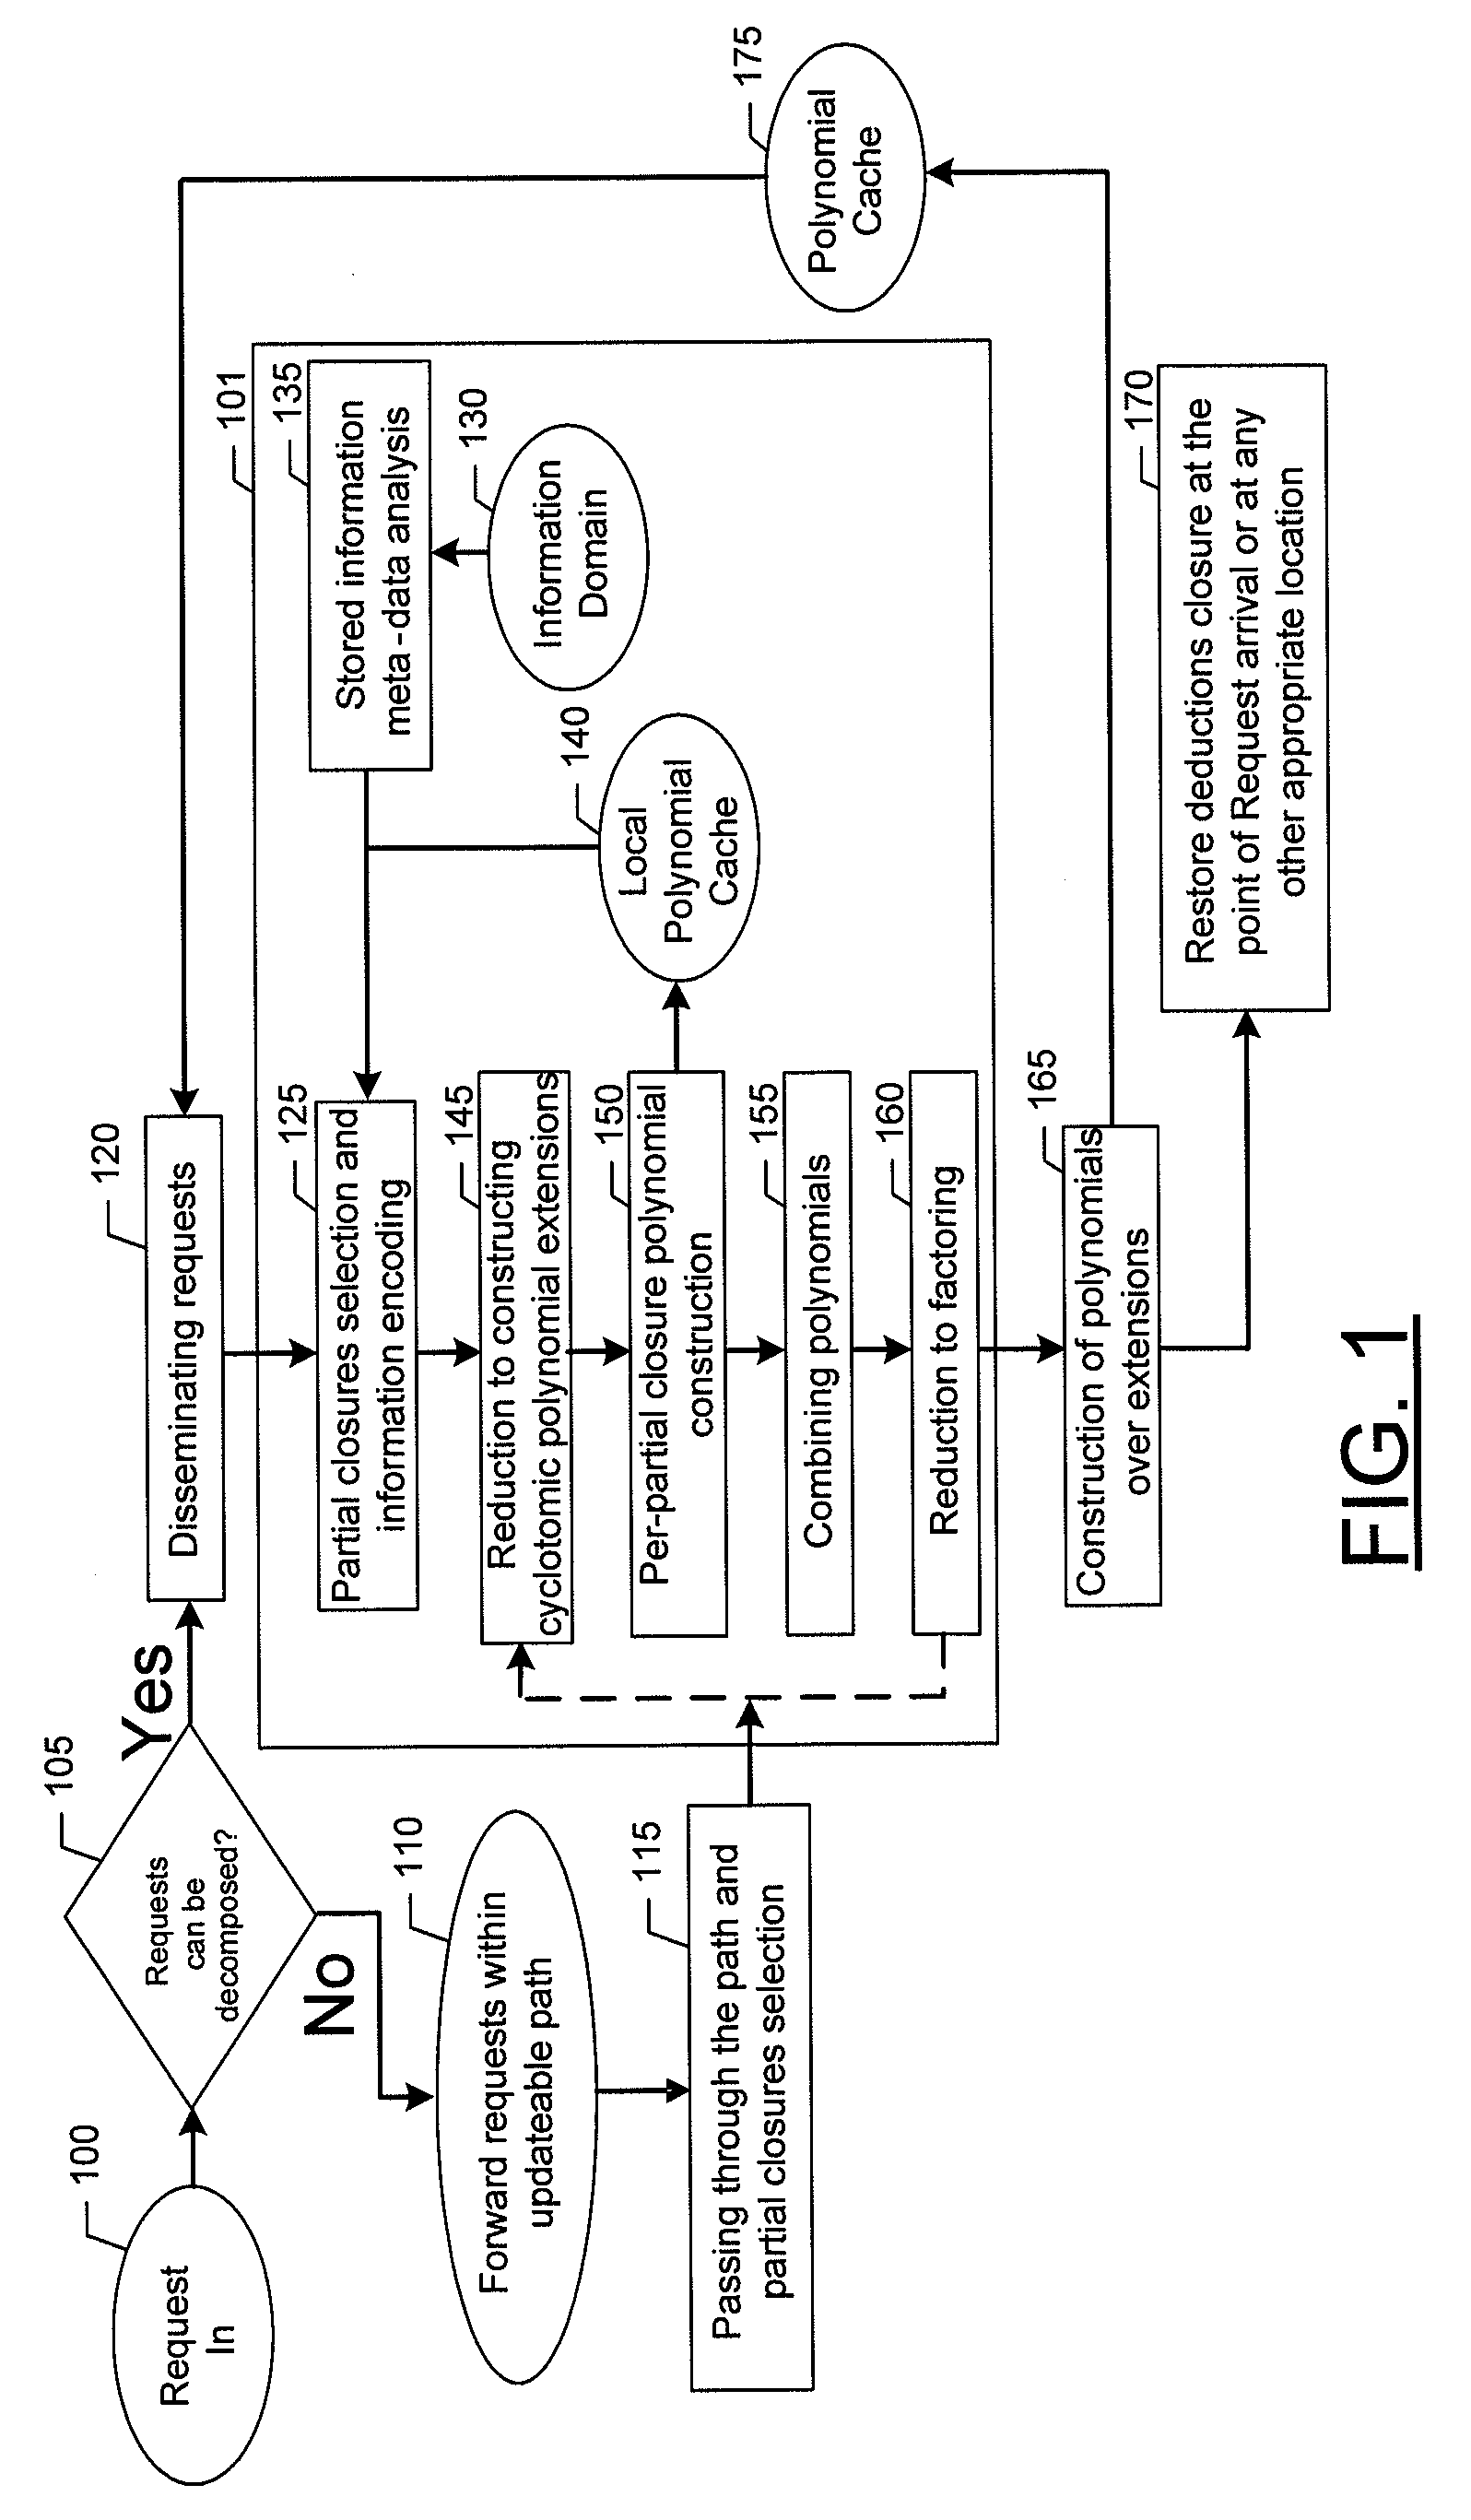 Method, apparatus, and computer program product for determining data signatures in a dynamic distributed device network